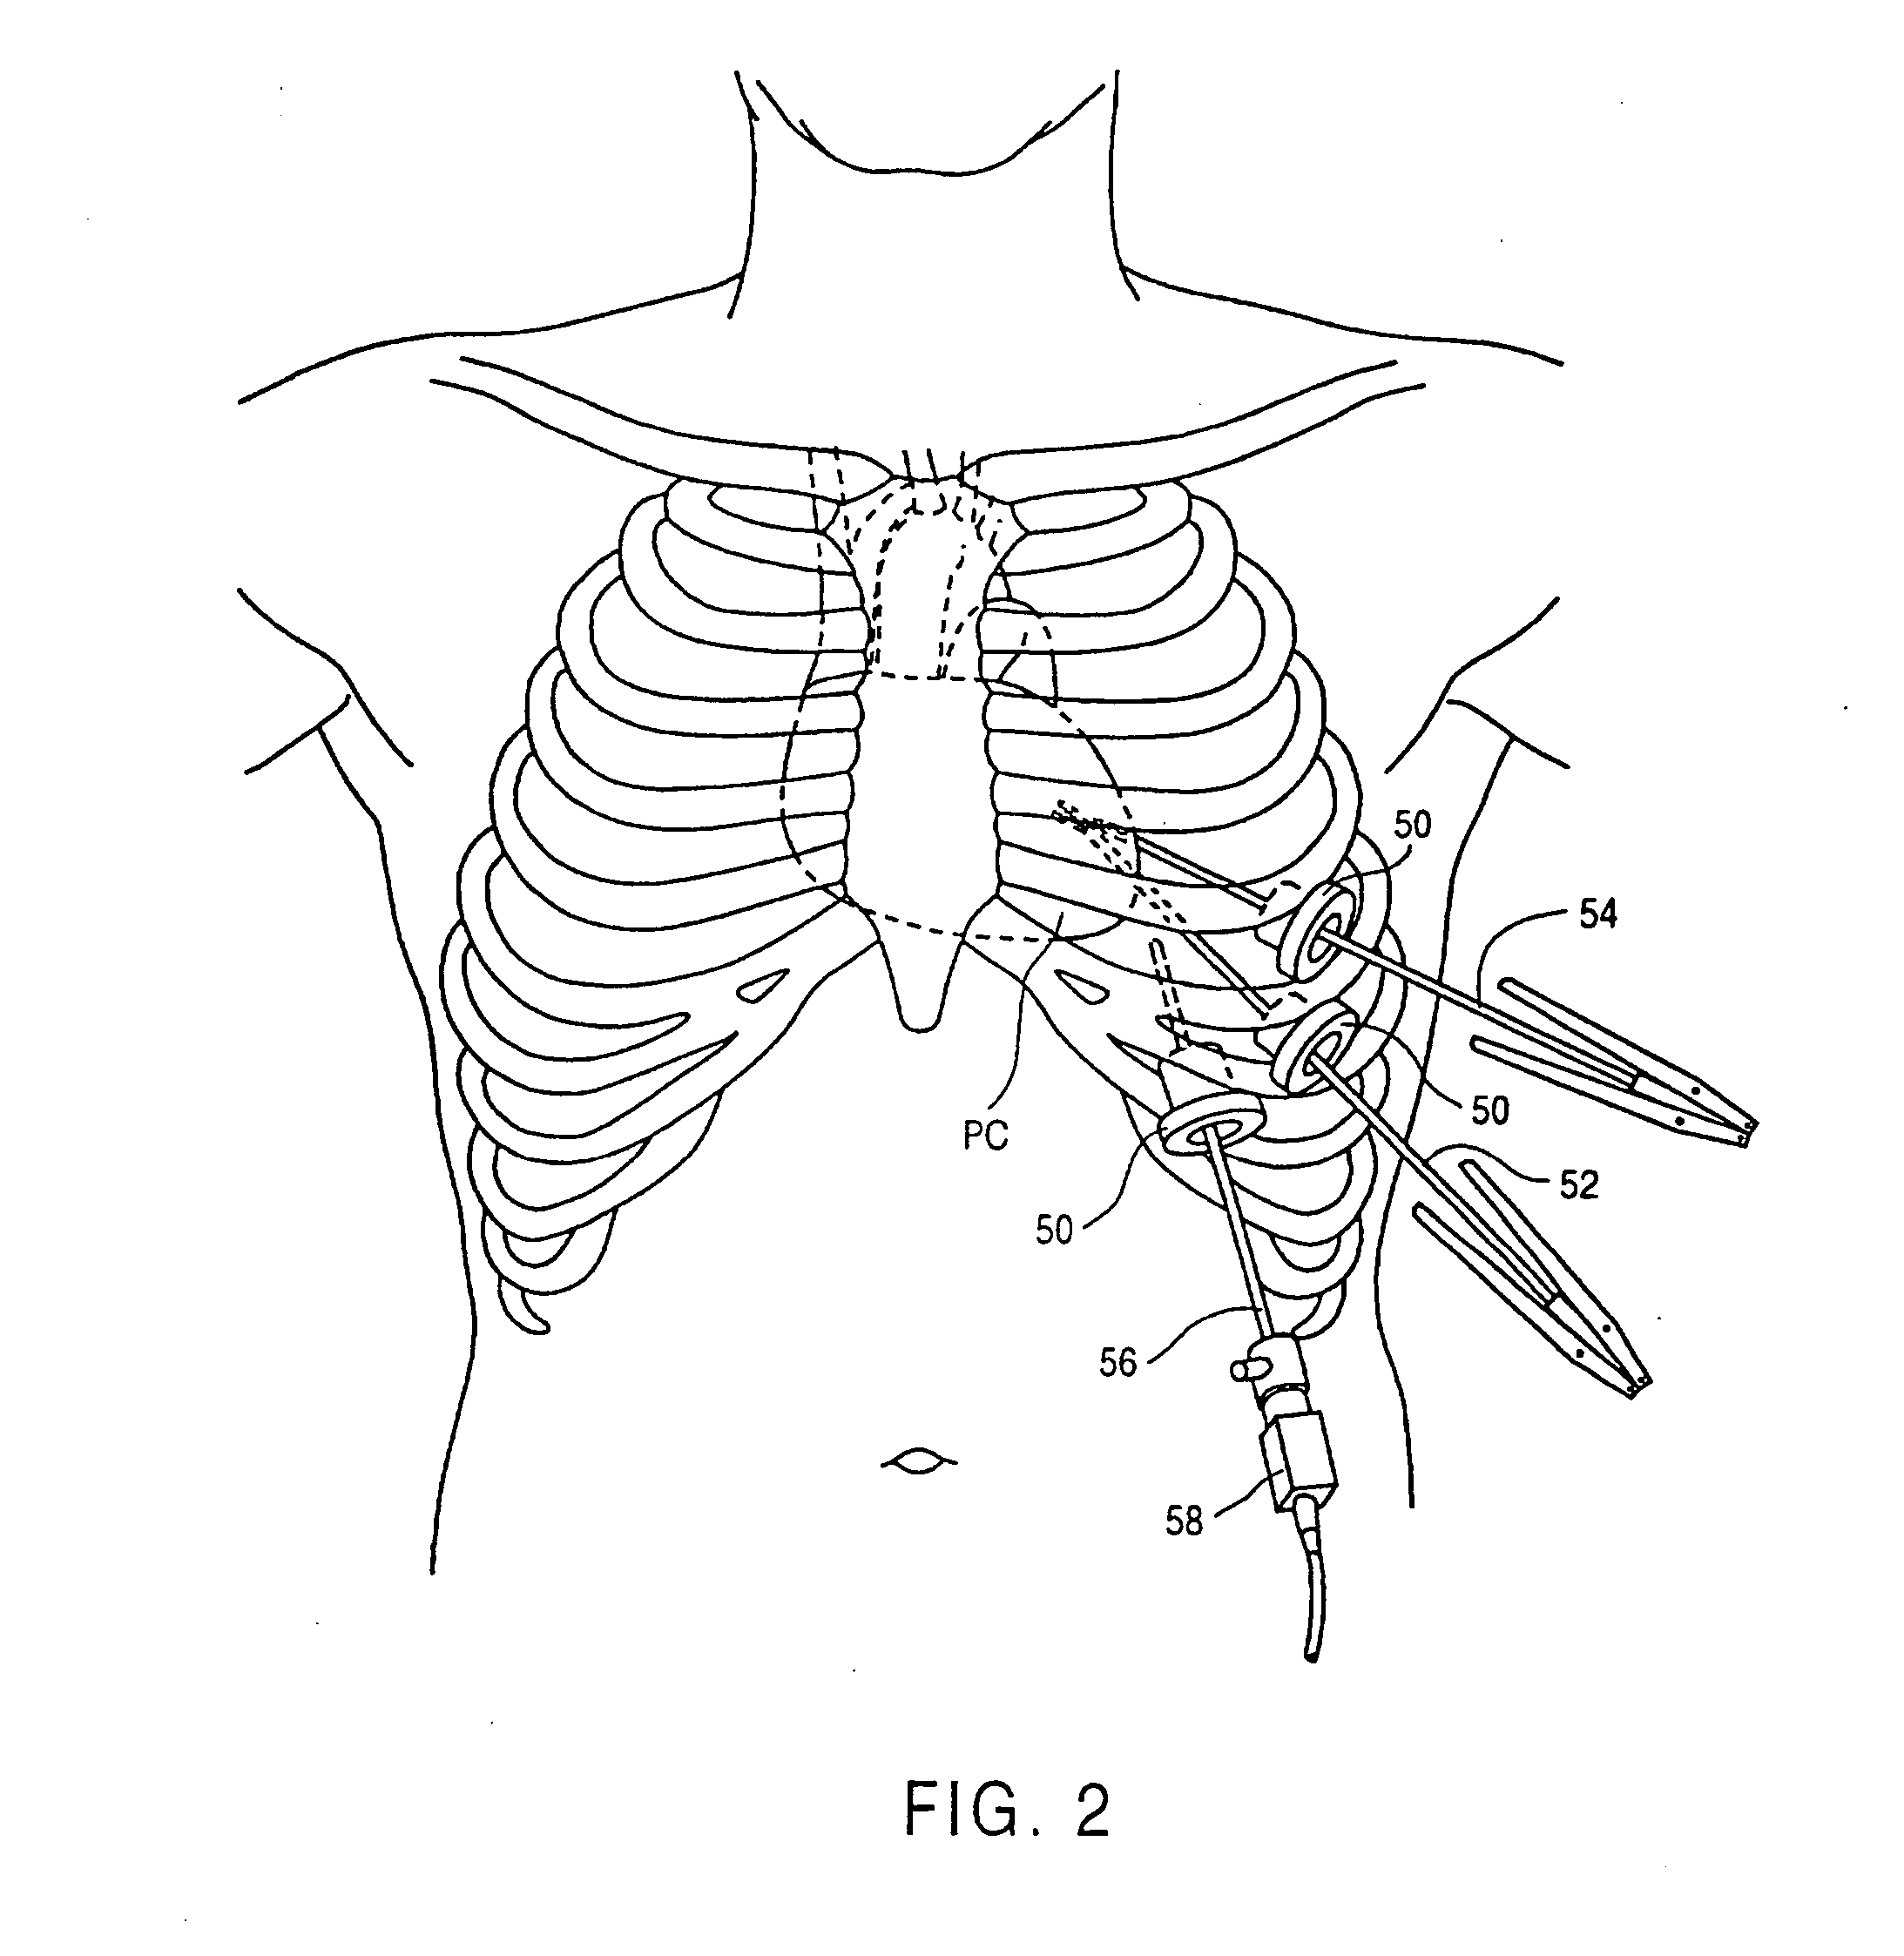 Minimally-invasive devices and methods for treatment of congestive heart failure